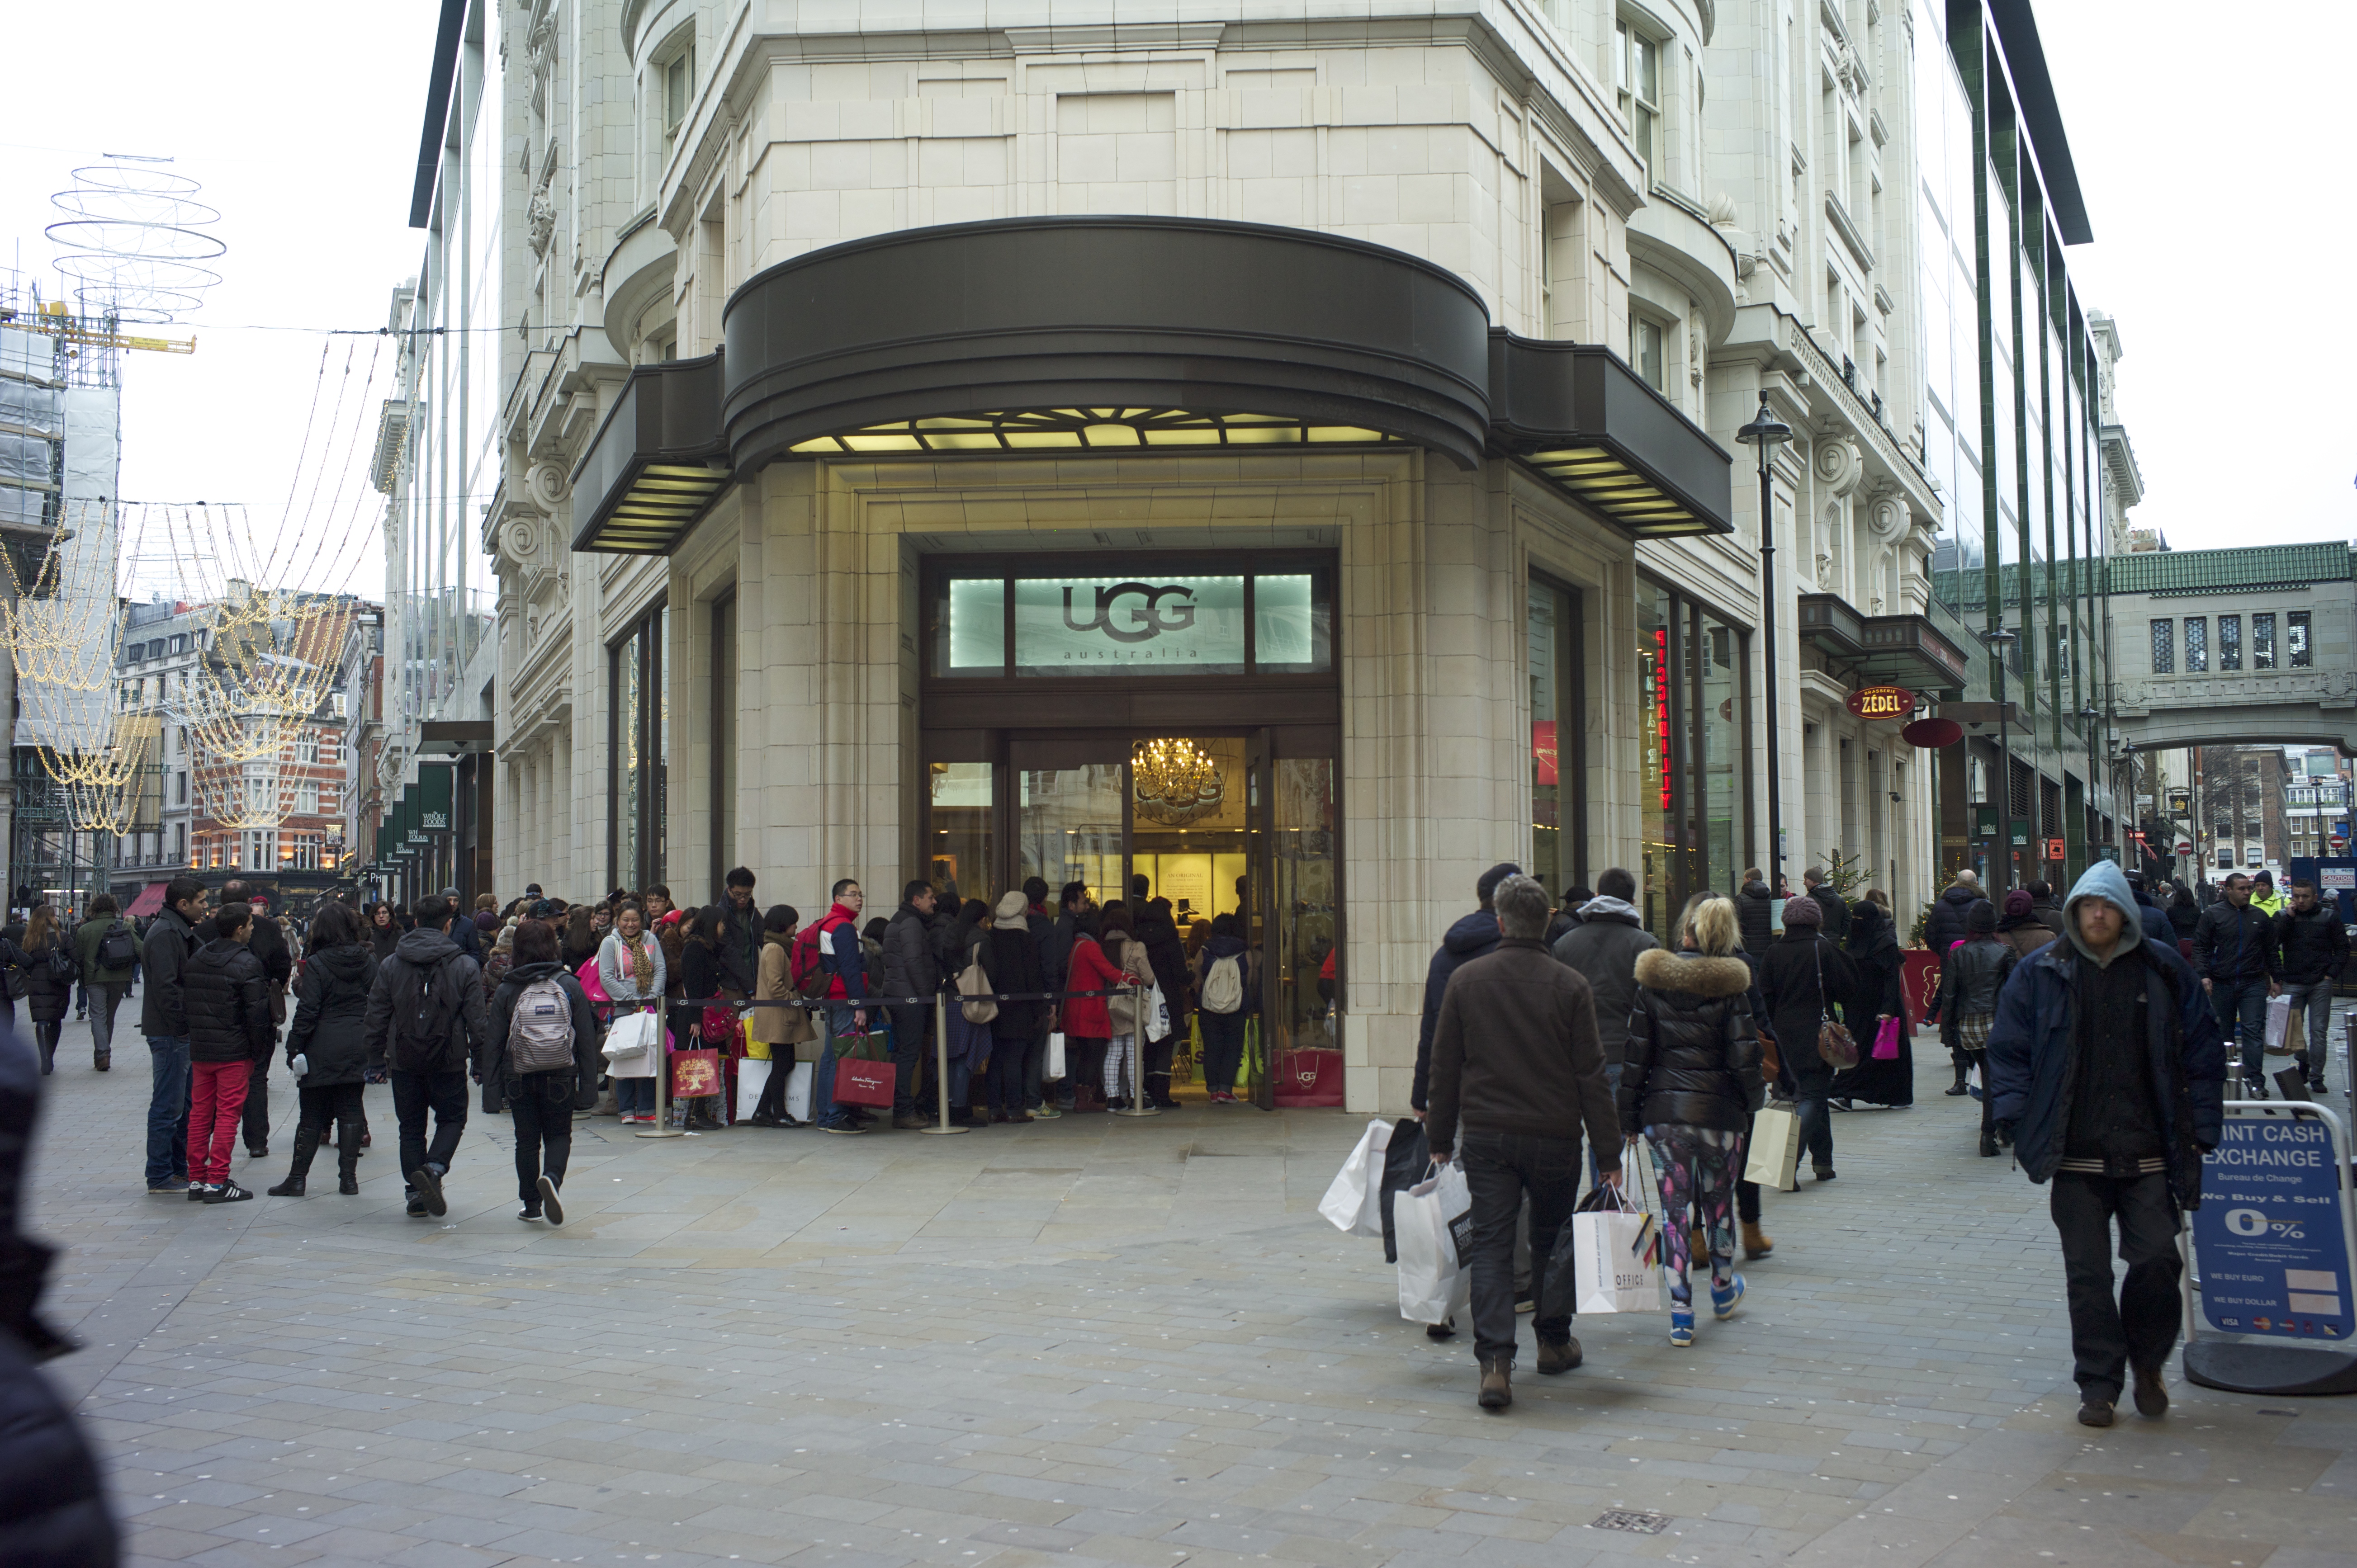 ugg piccadilly circus off 53% - www 